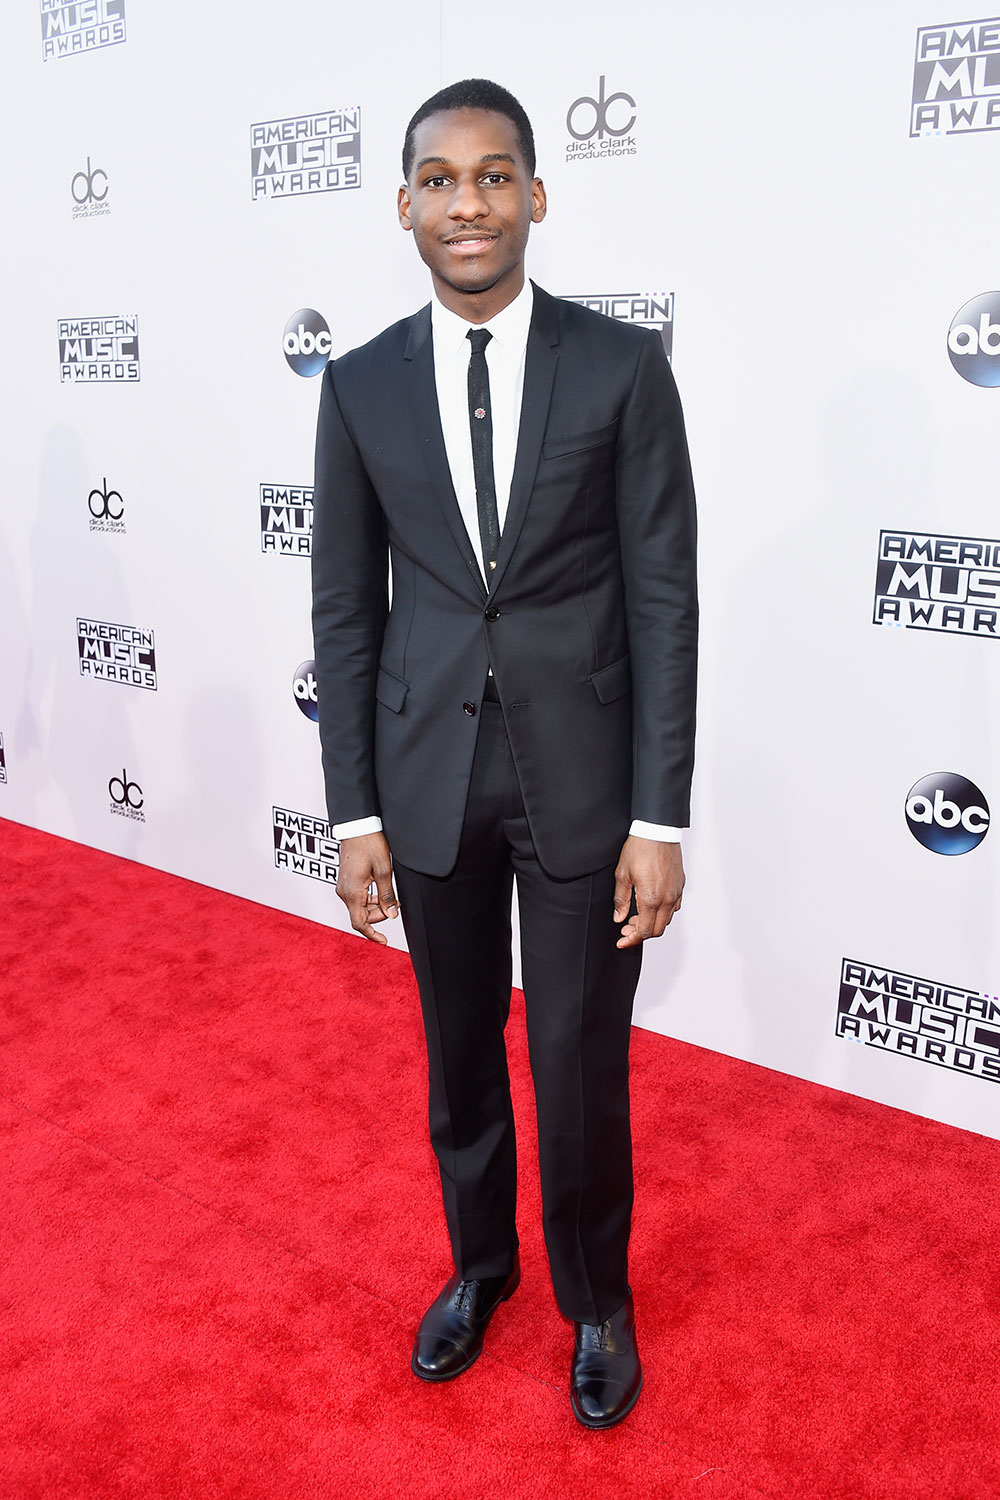 Leon Bridges pairs a black suit with a skinny tie in a shoutout to his homestate of Texas.